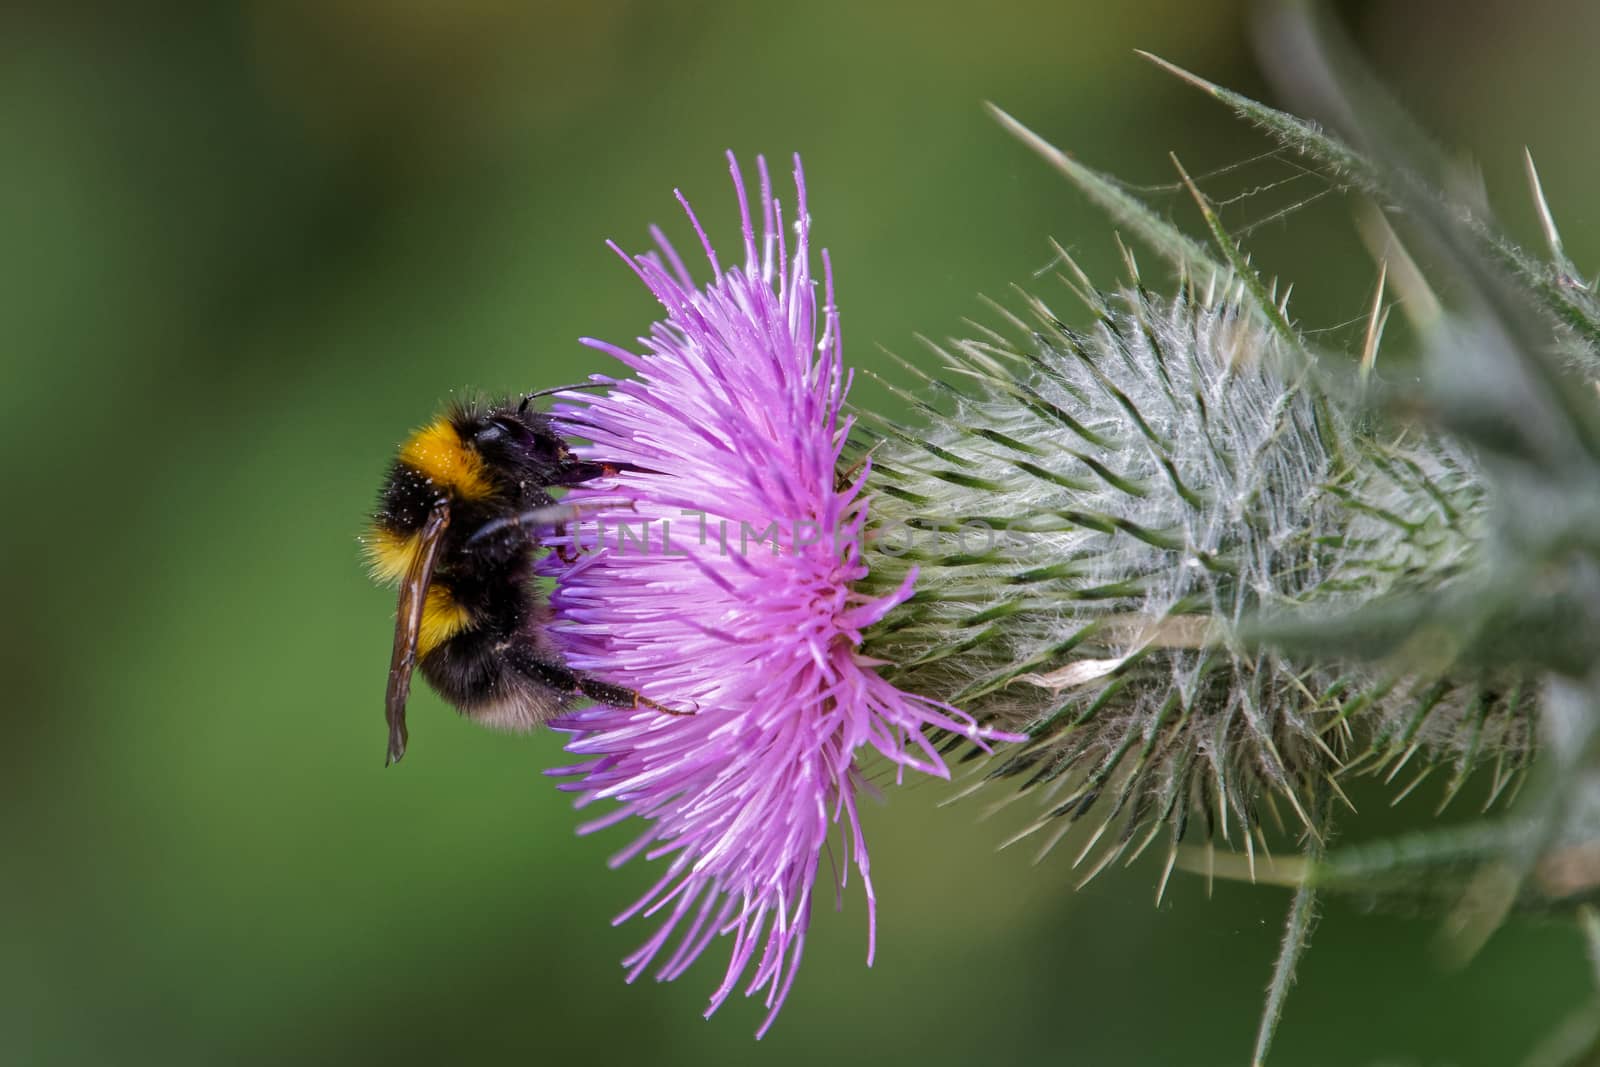 Buff-tailed bumblebee (Bombus terrestris) gathering pollen from a Thistle